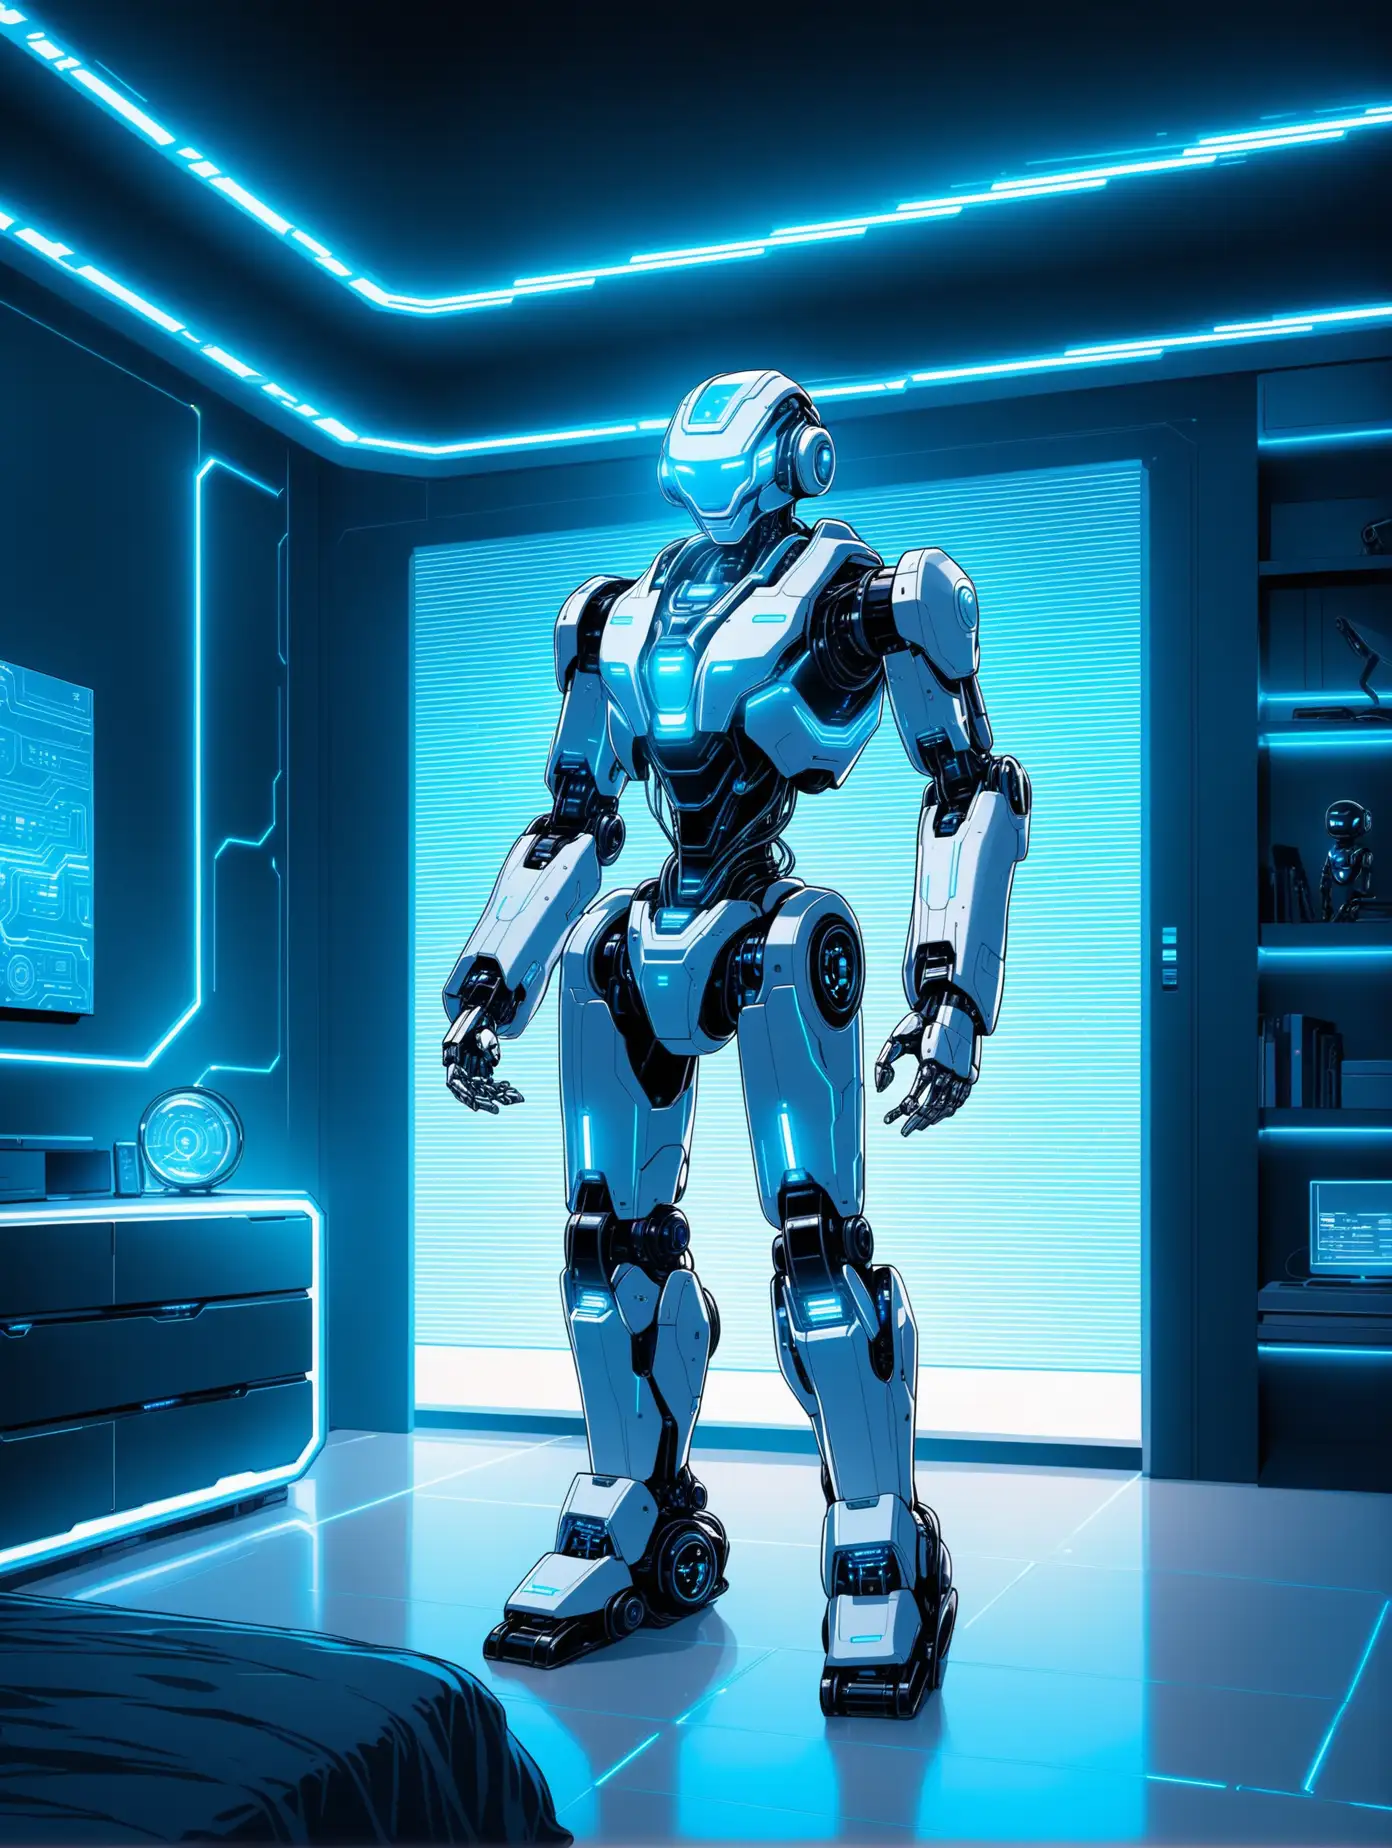 Futuristic AI Robot in HighTech Bedroom with Blue LED Lights